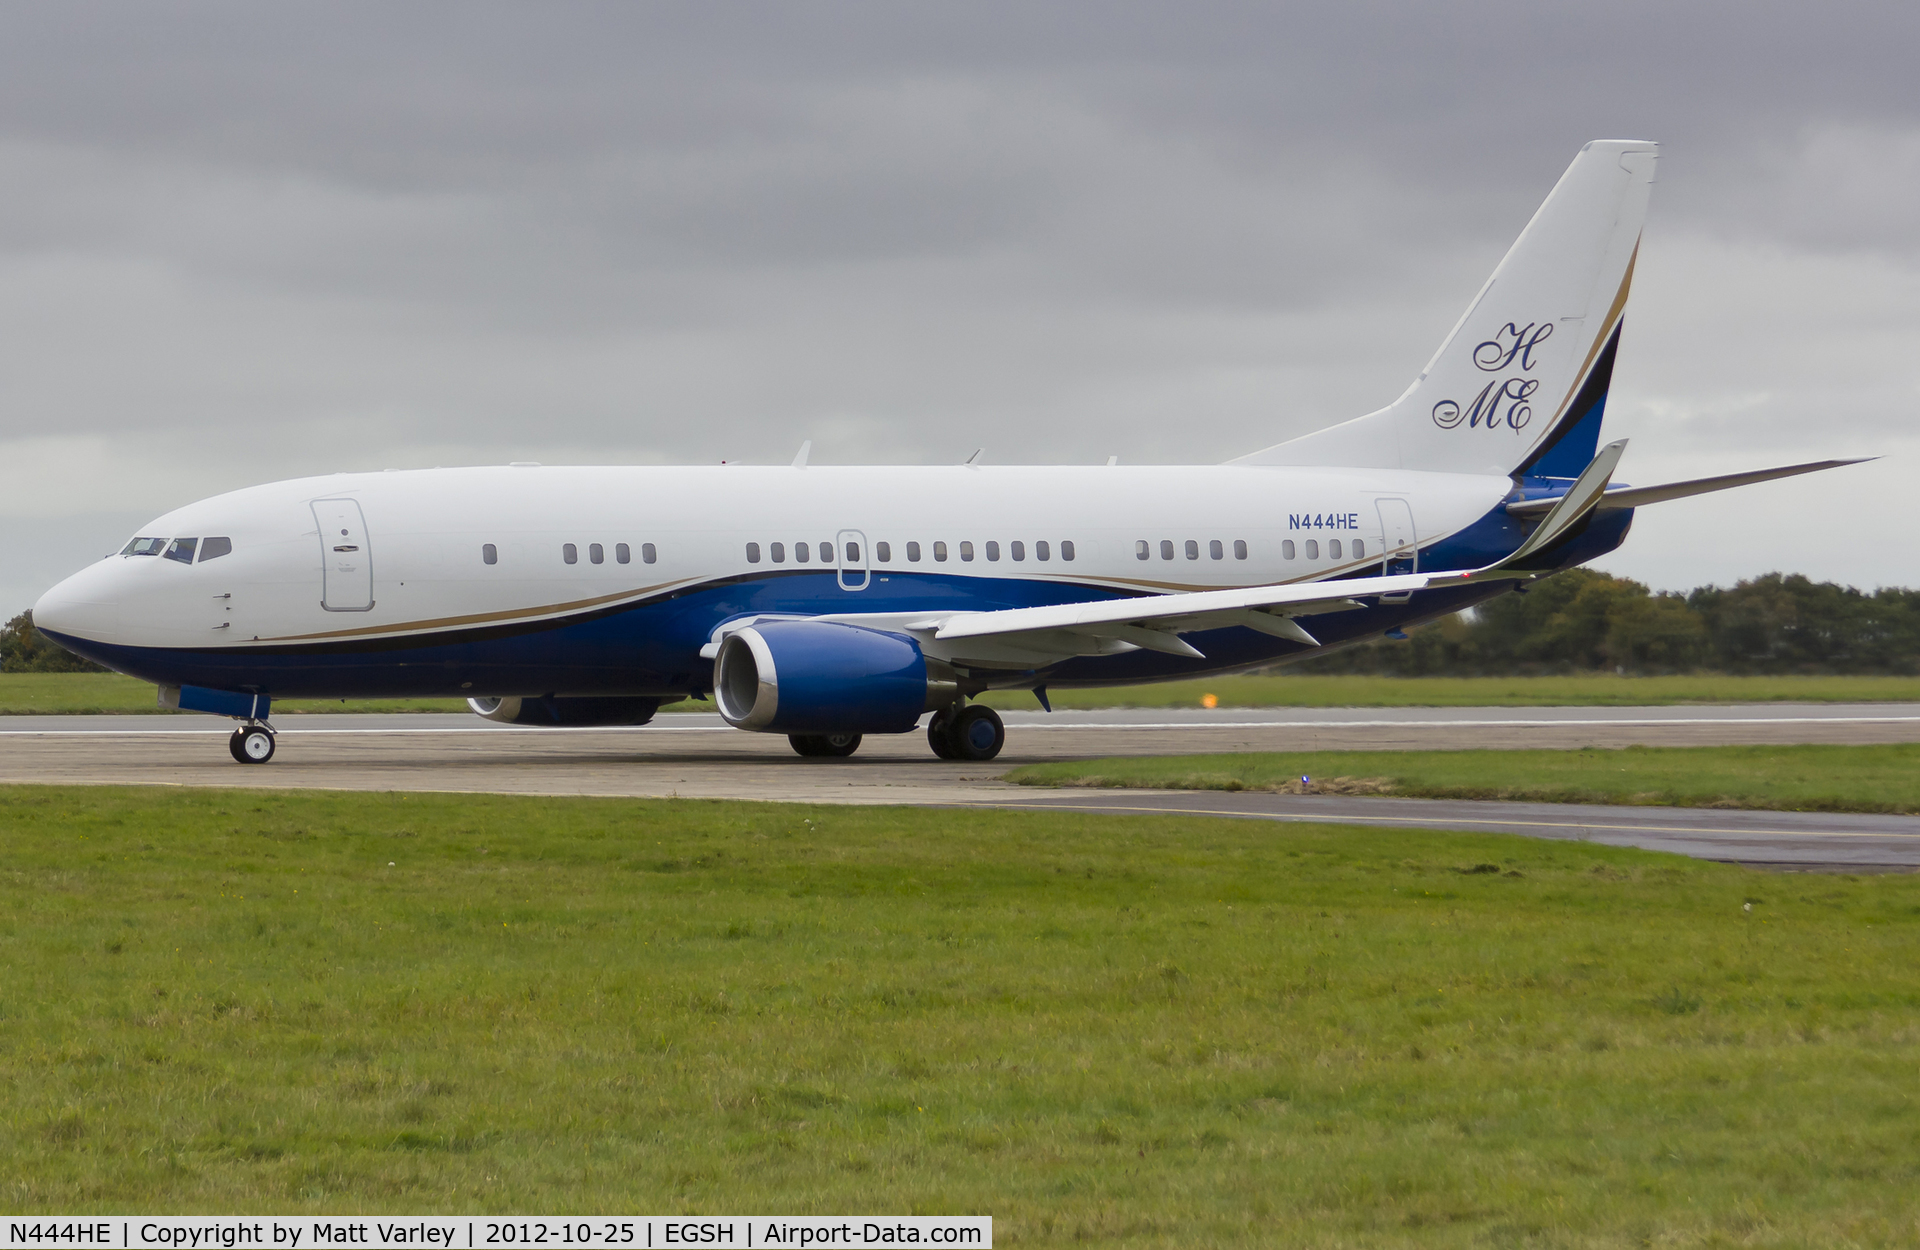 N444HE, 1987 Boeing 737-300 C/N 23800, Departing for stansted Airport.